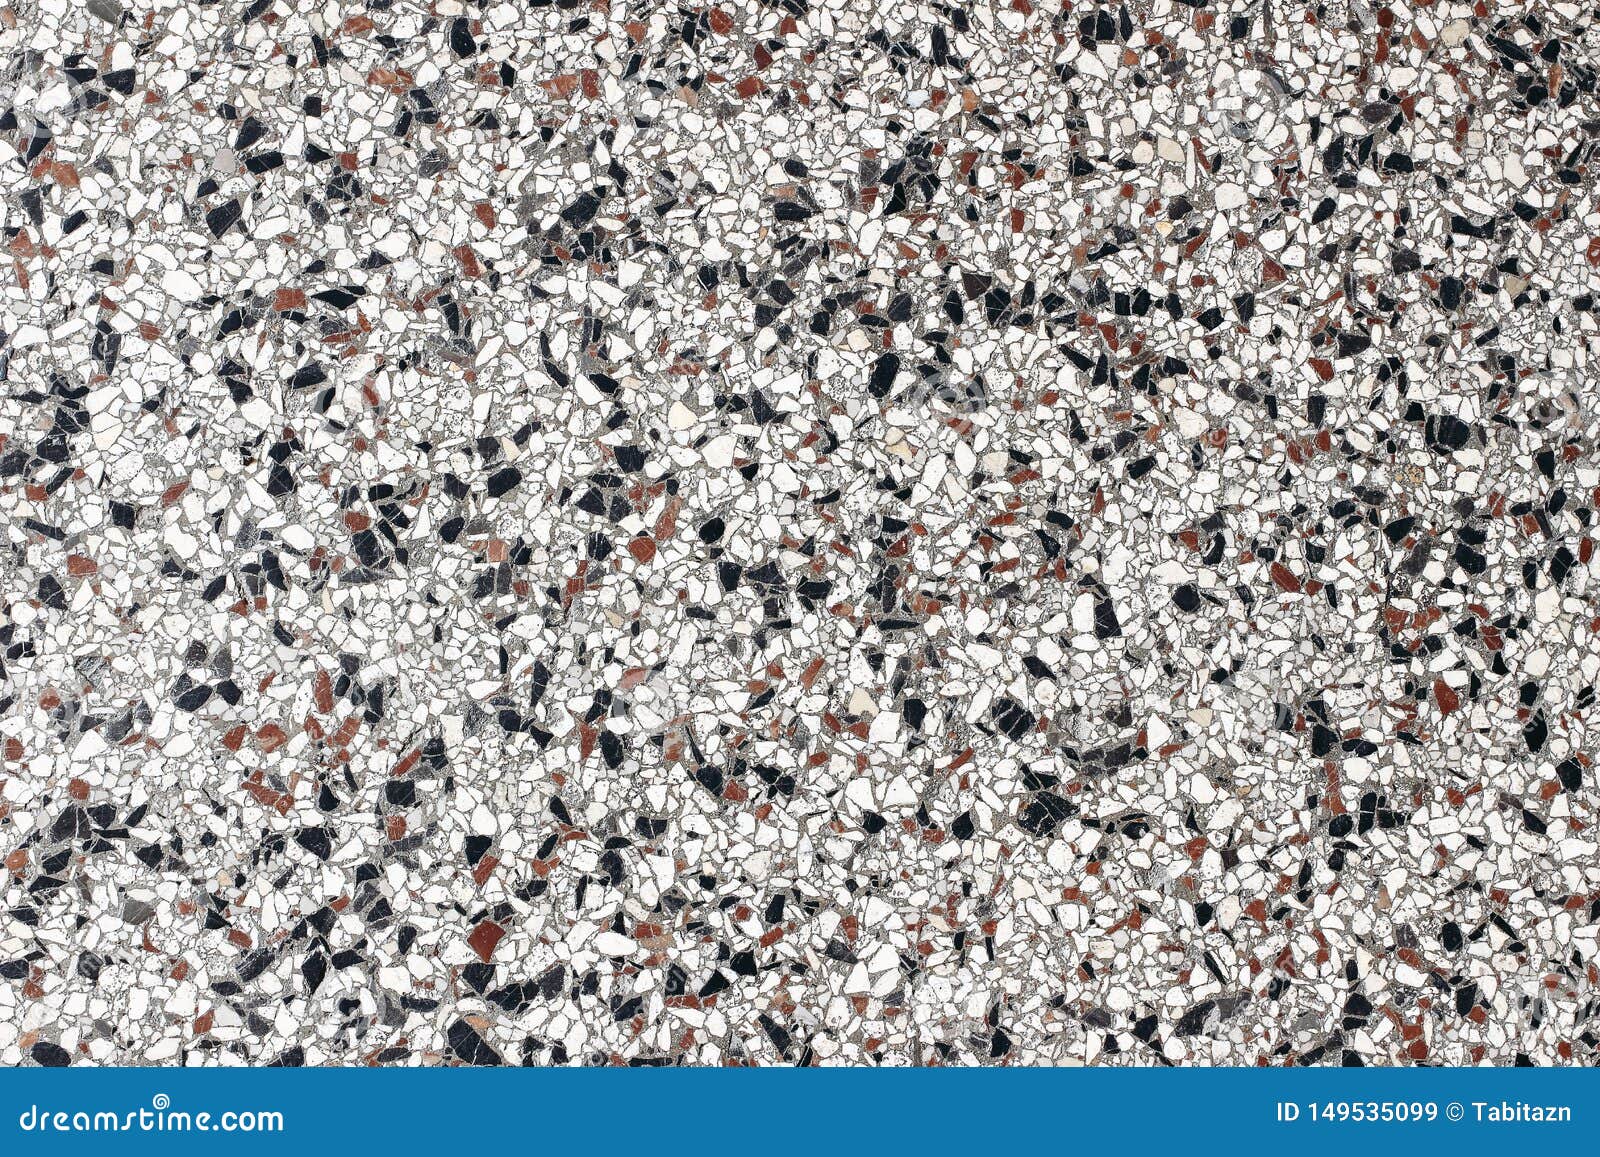 terrazzo texture backgound. old grunge marbled stone floor in white, grey, black and brown color.